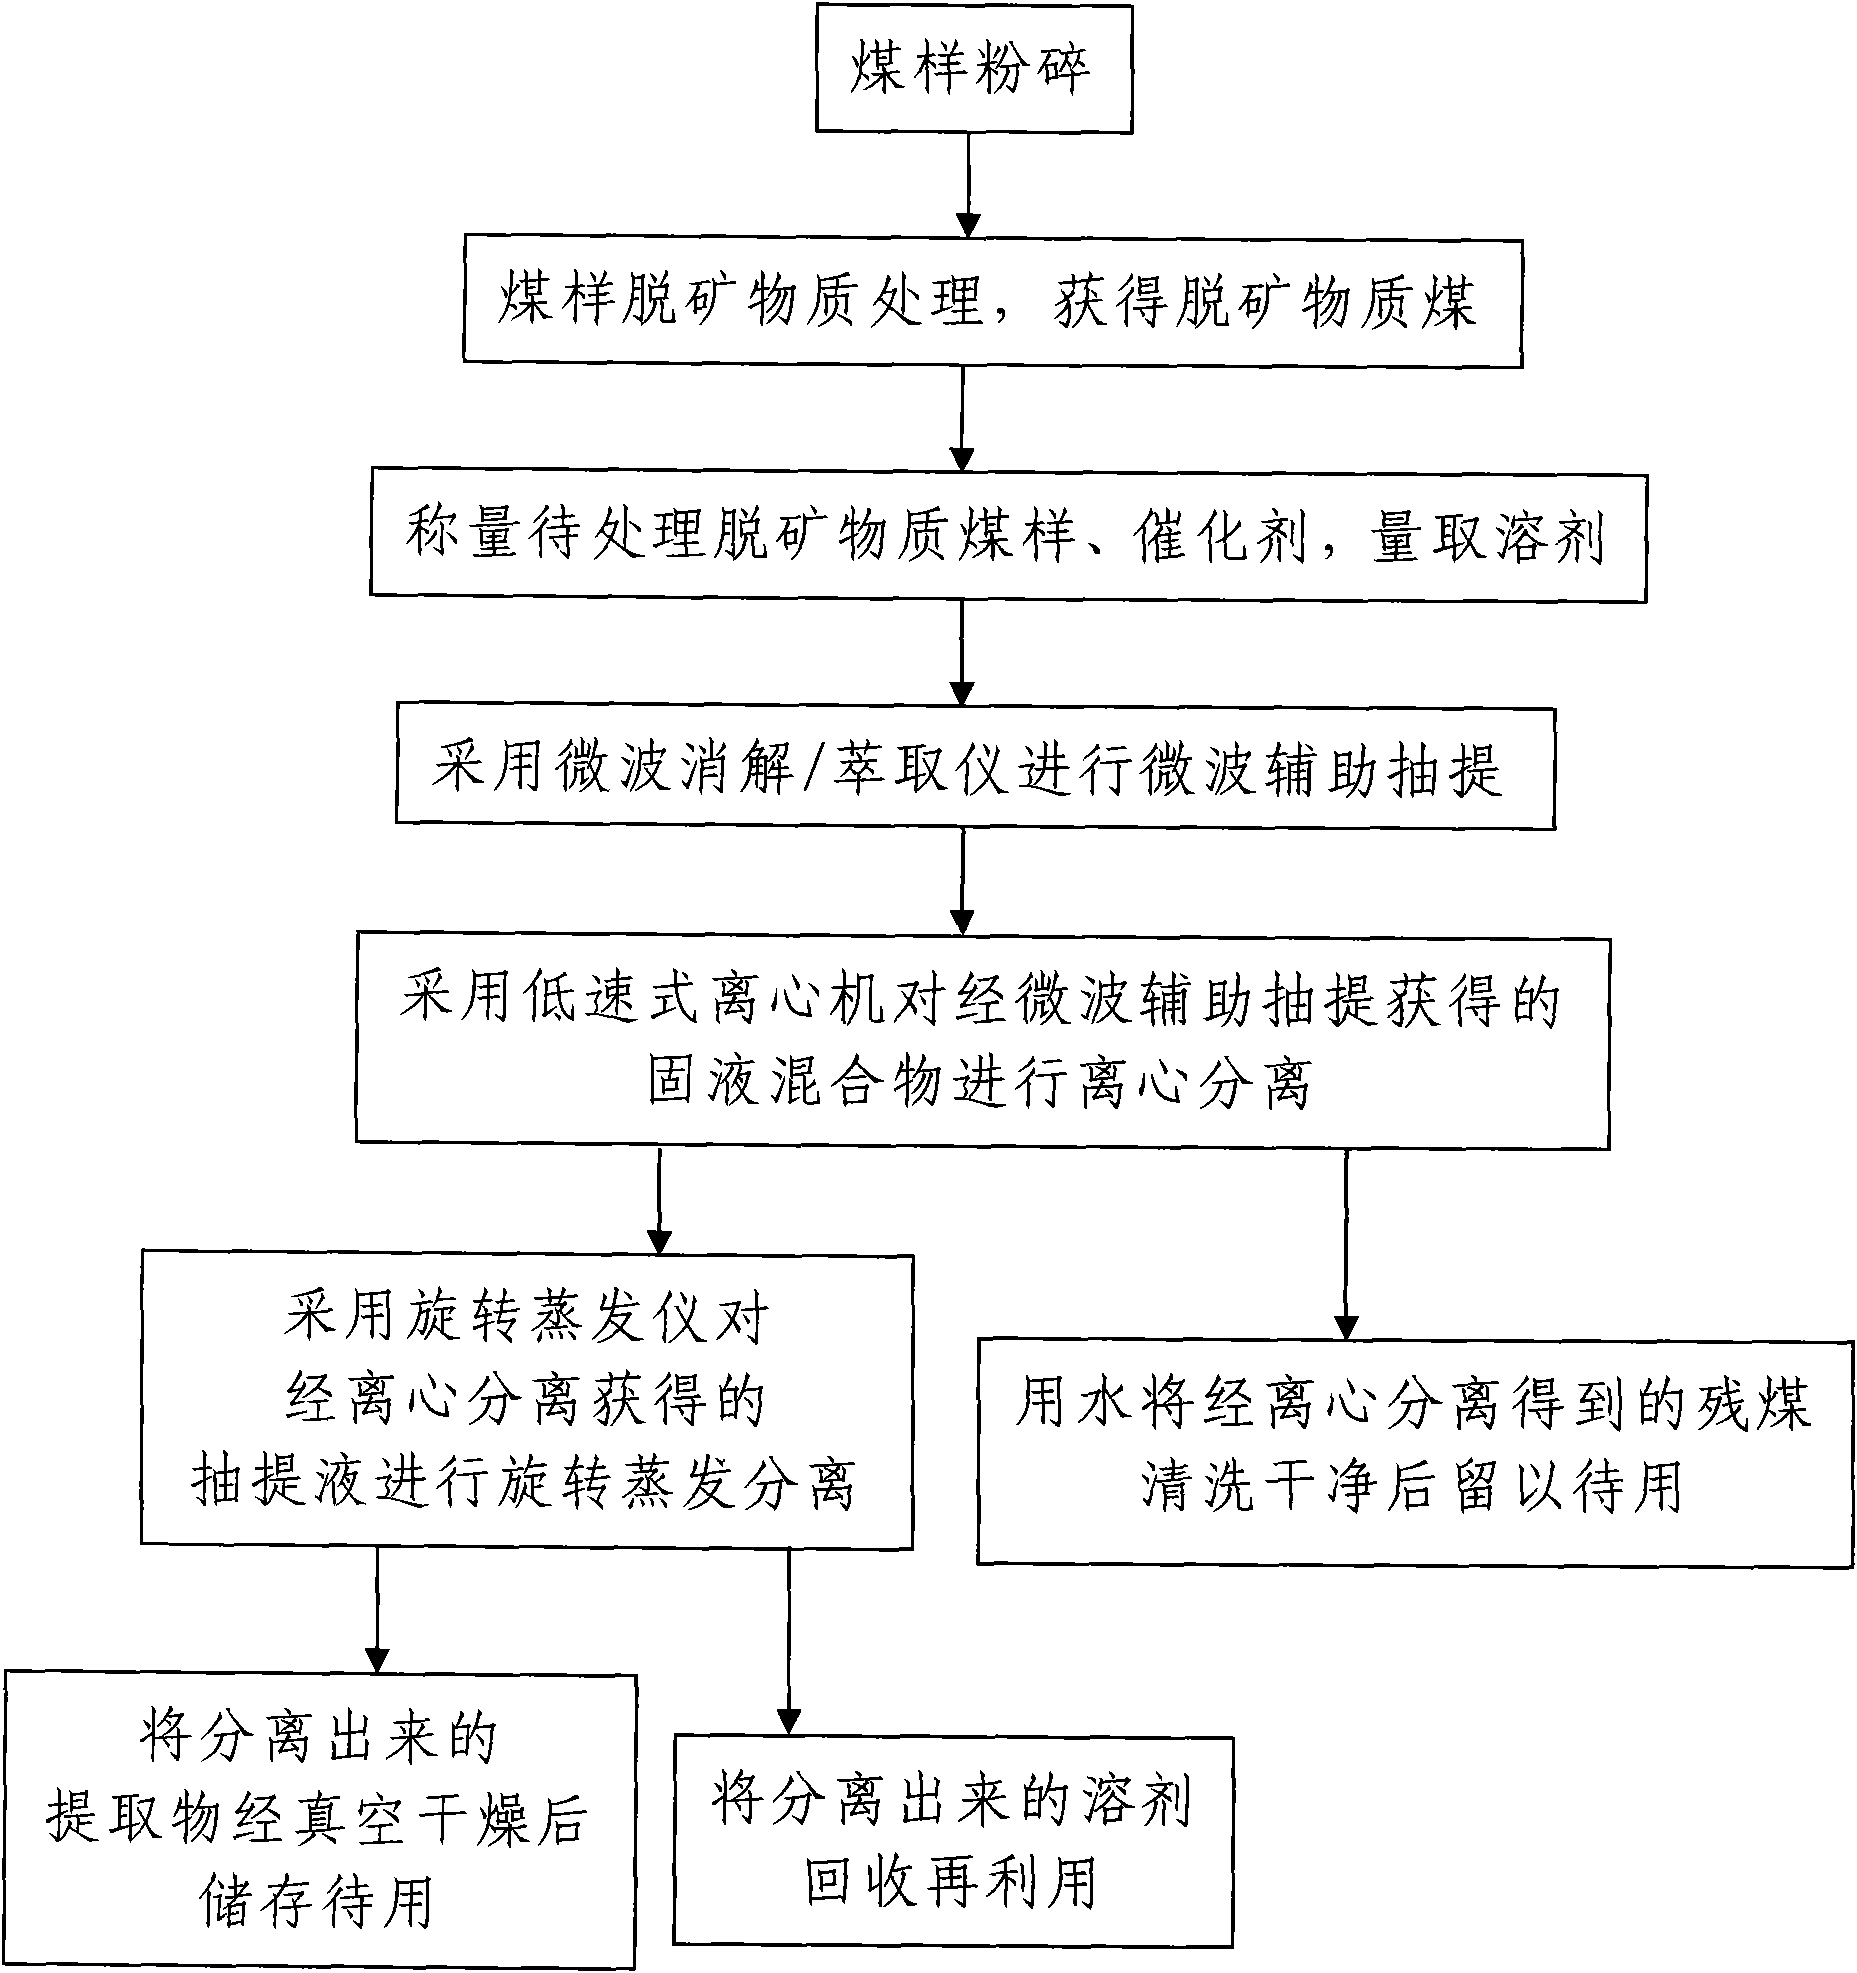 Microwave-assisted coal extraction method through ethanol